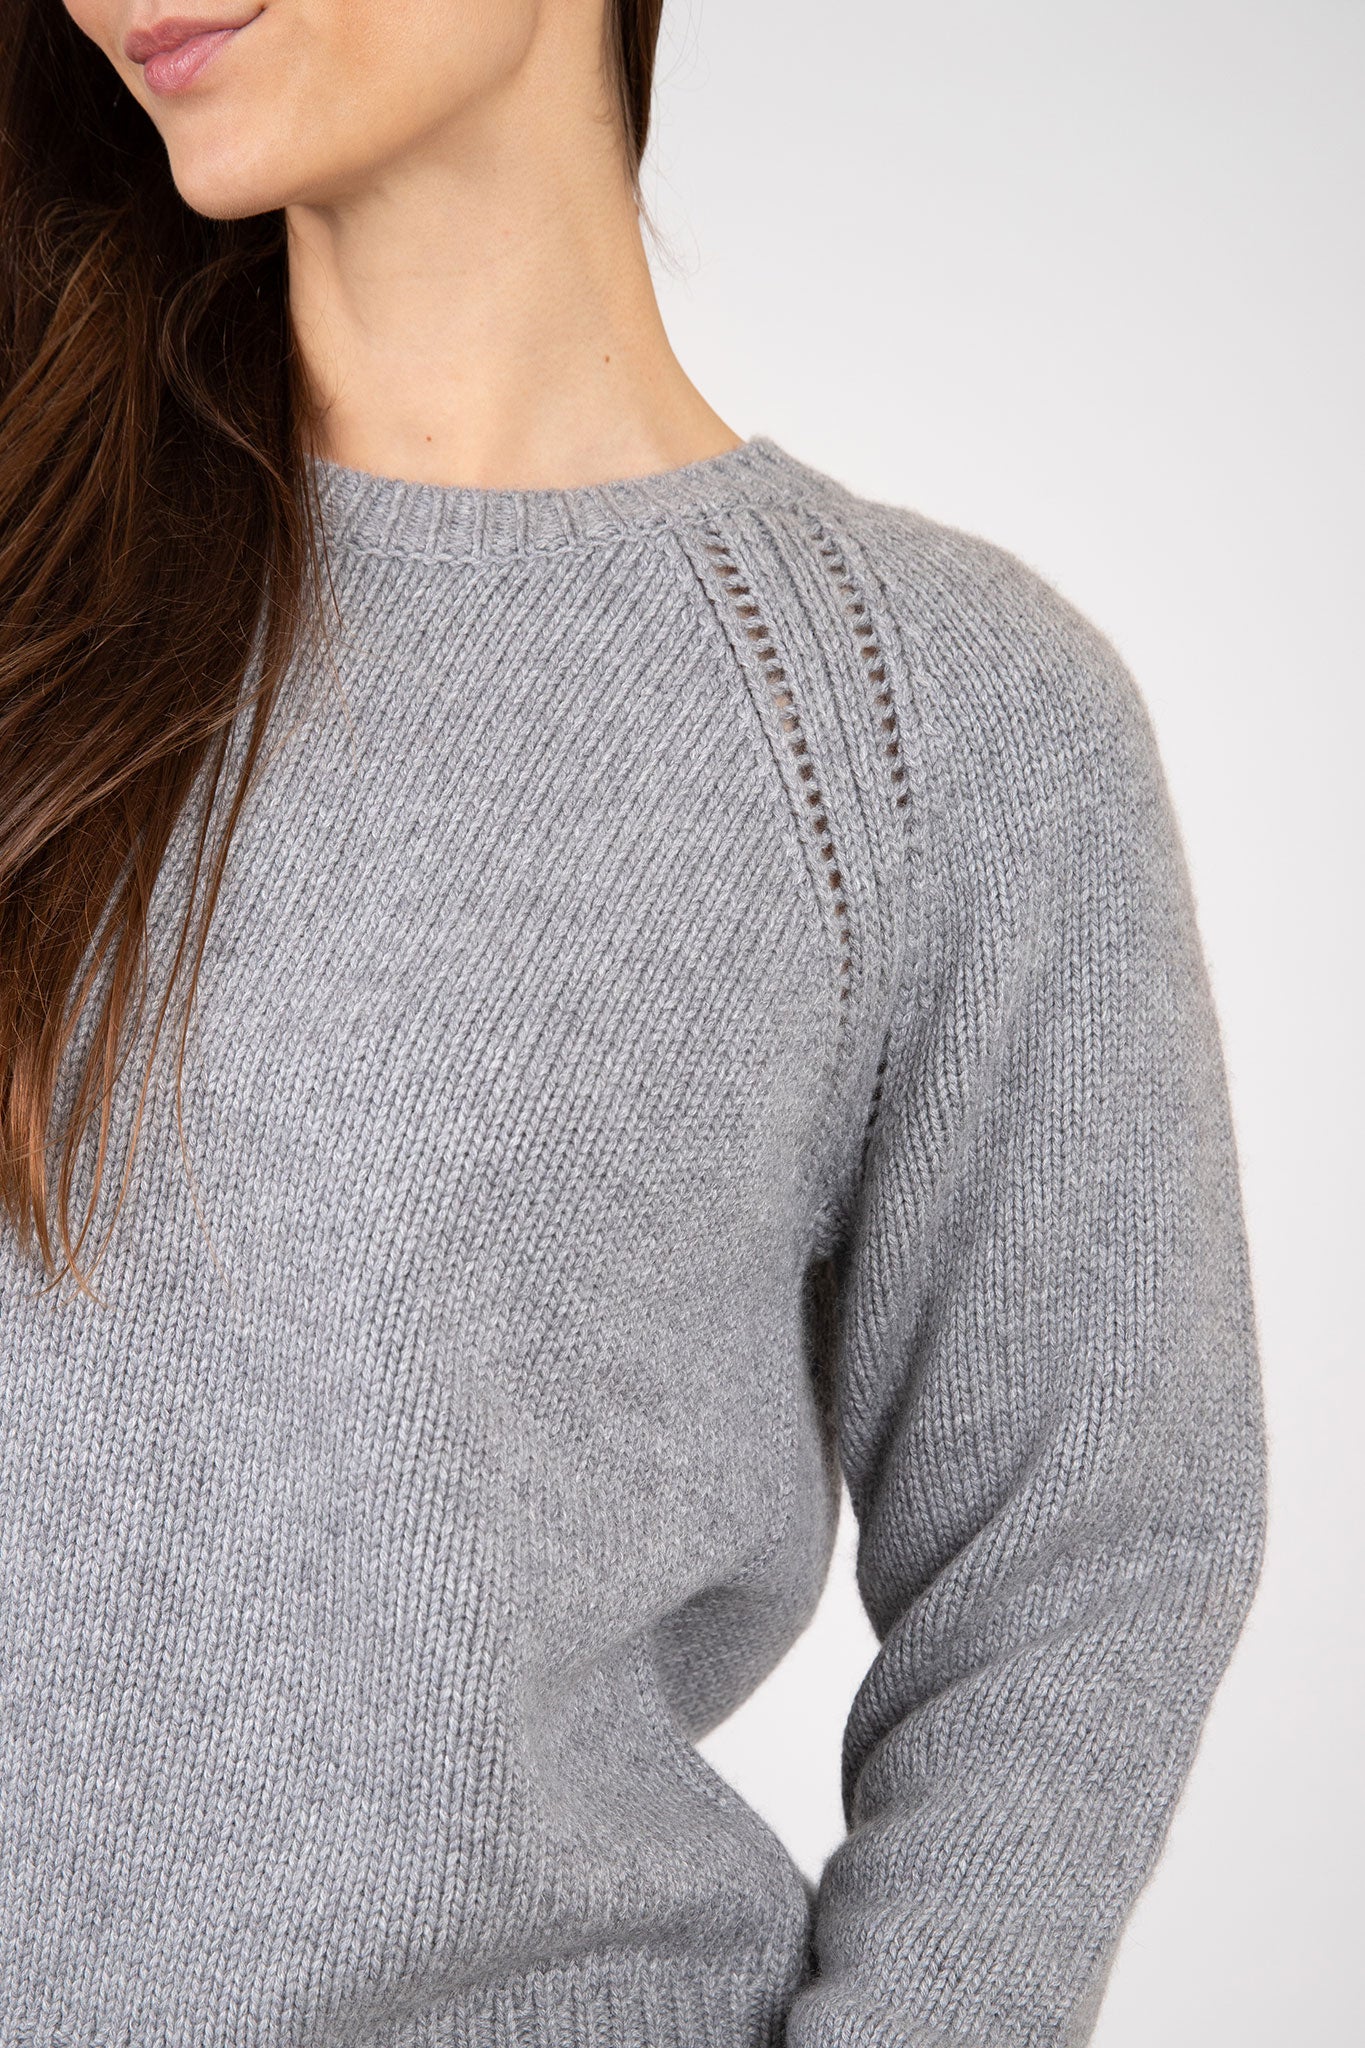 Relaxed Open Raglan Crew Sweaters & Knits Autumn Cashmere   